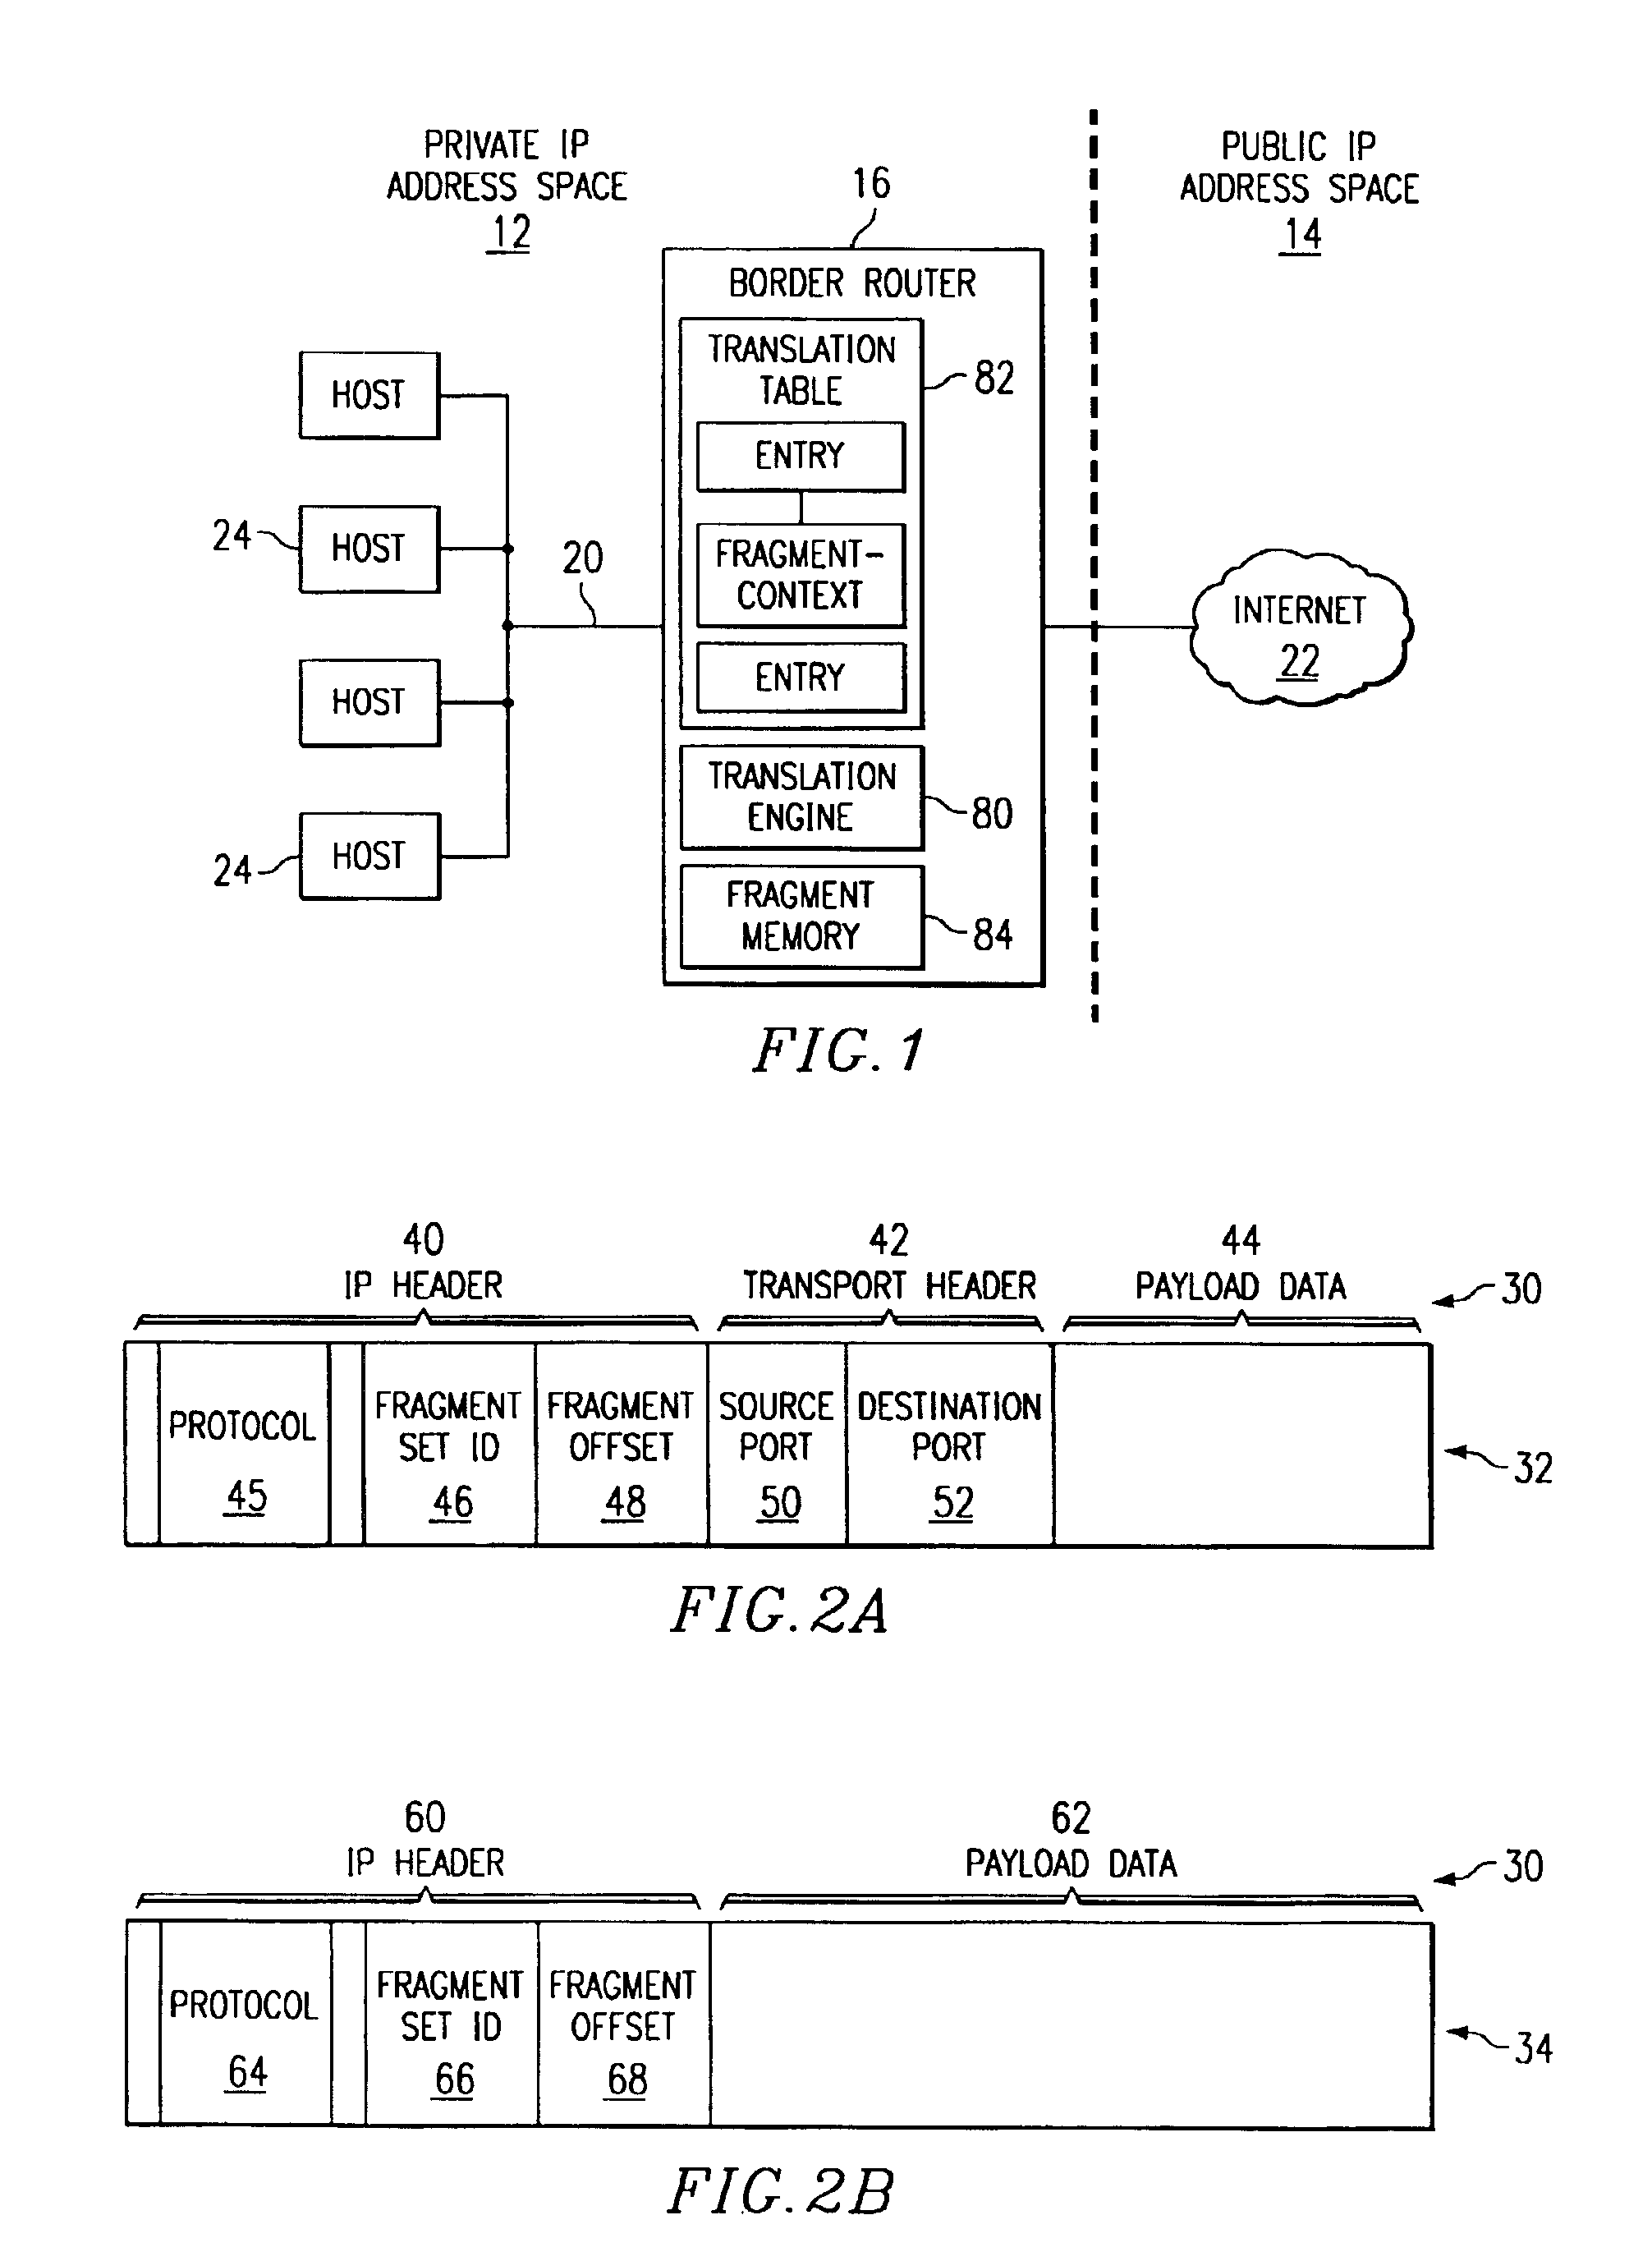 Method and system for processing fragments and their out-of-order delivery during address translation